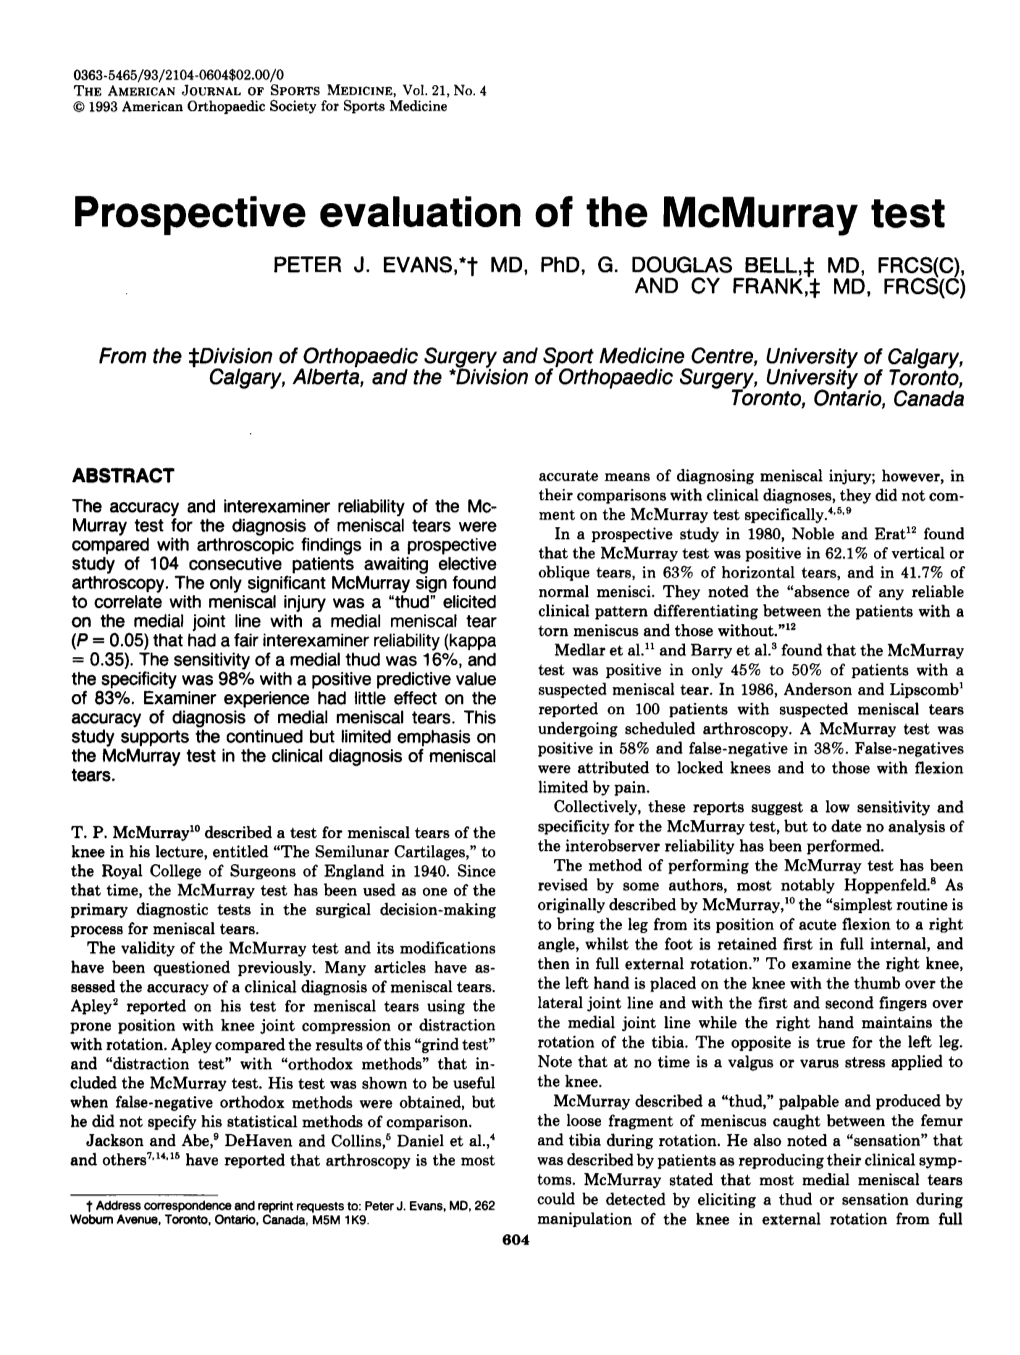 Prospective Evaluation of the Mcmurray Test PETER J